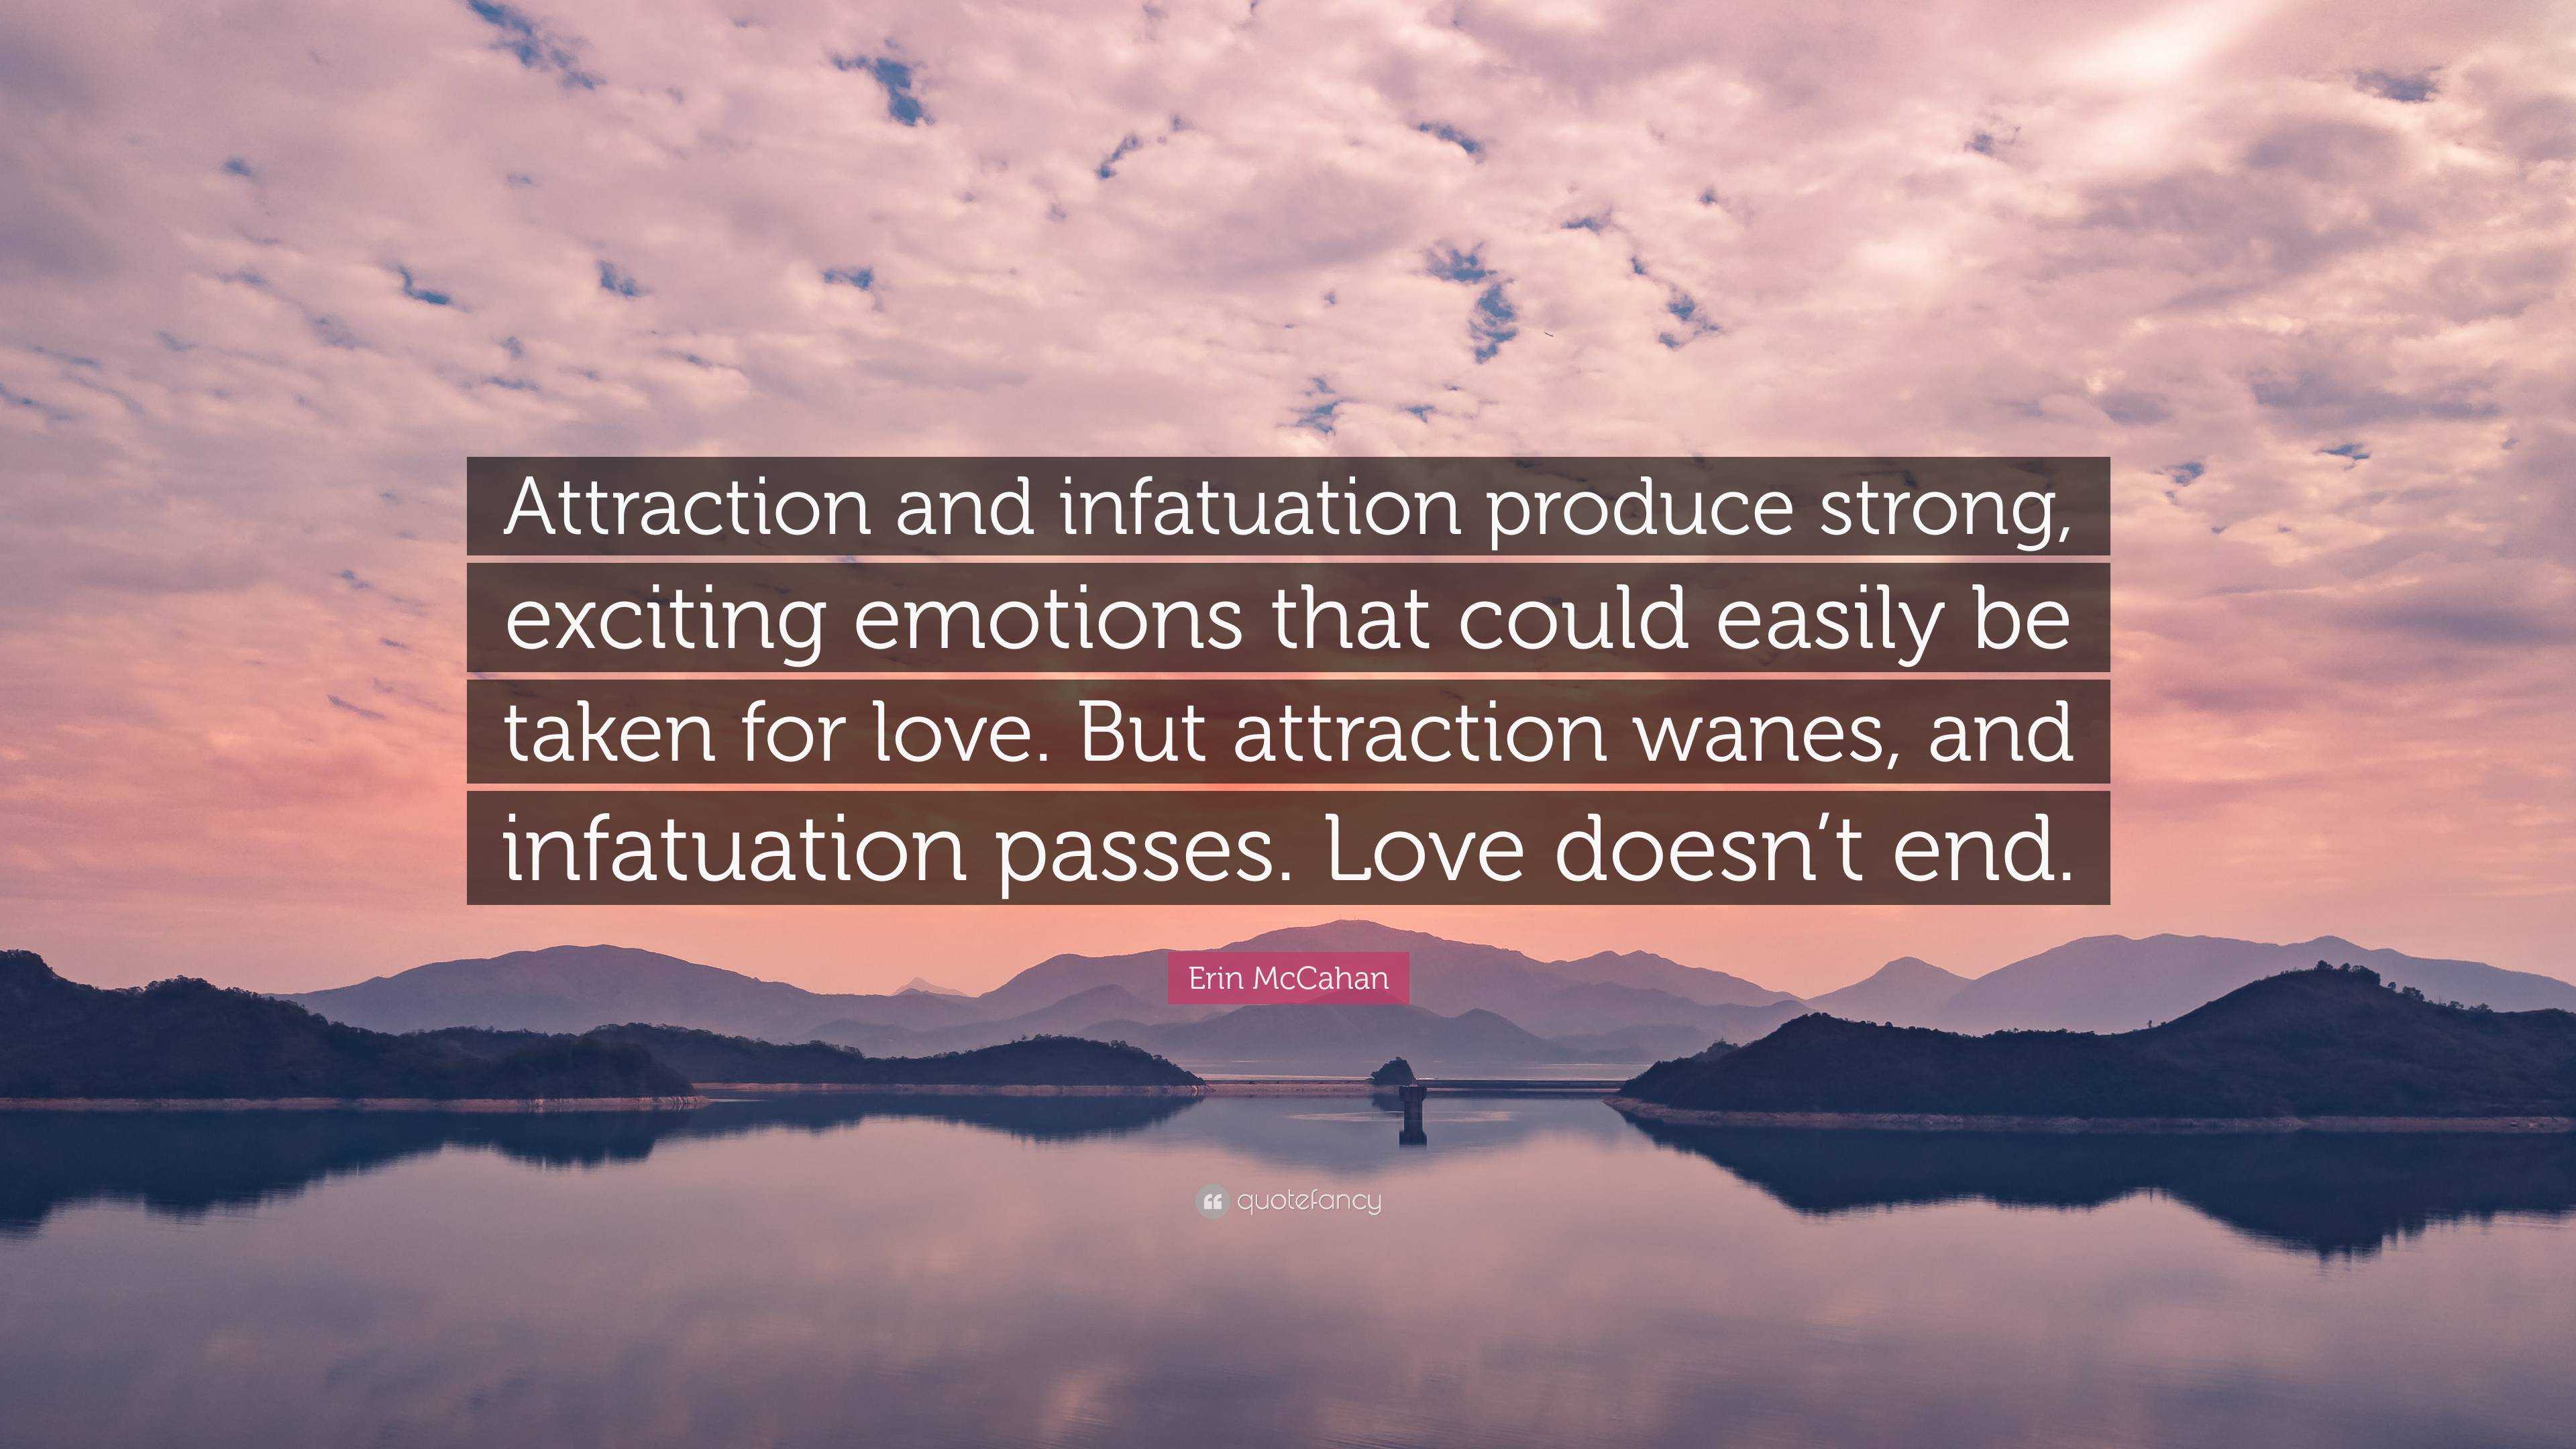 difference between attraction and infatuation